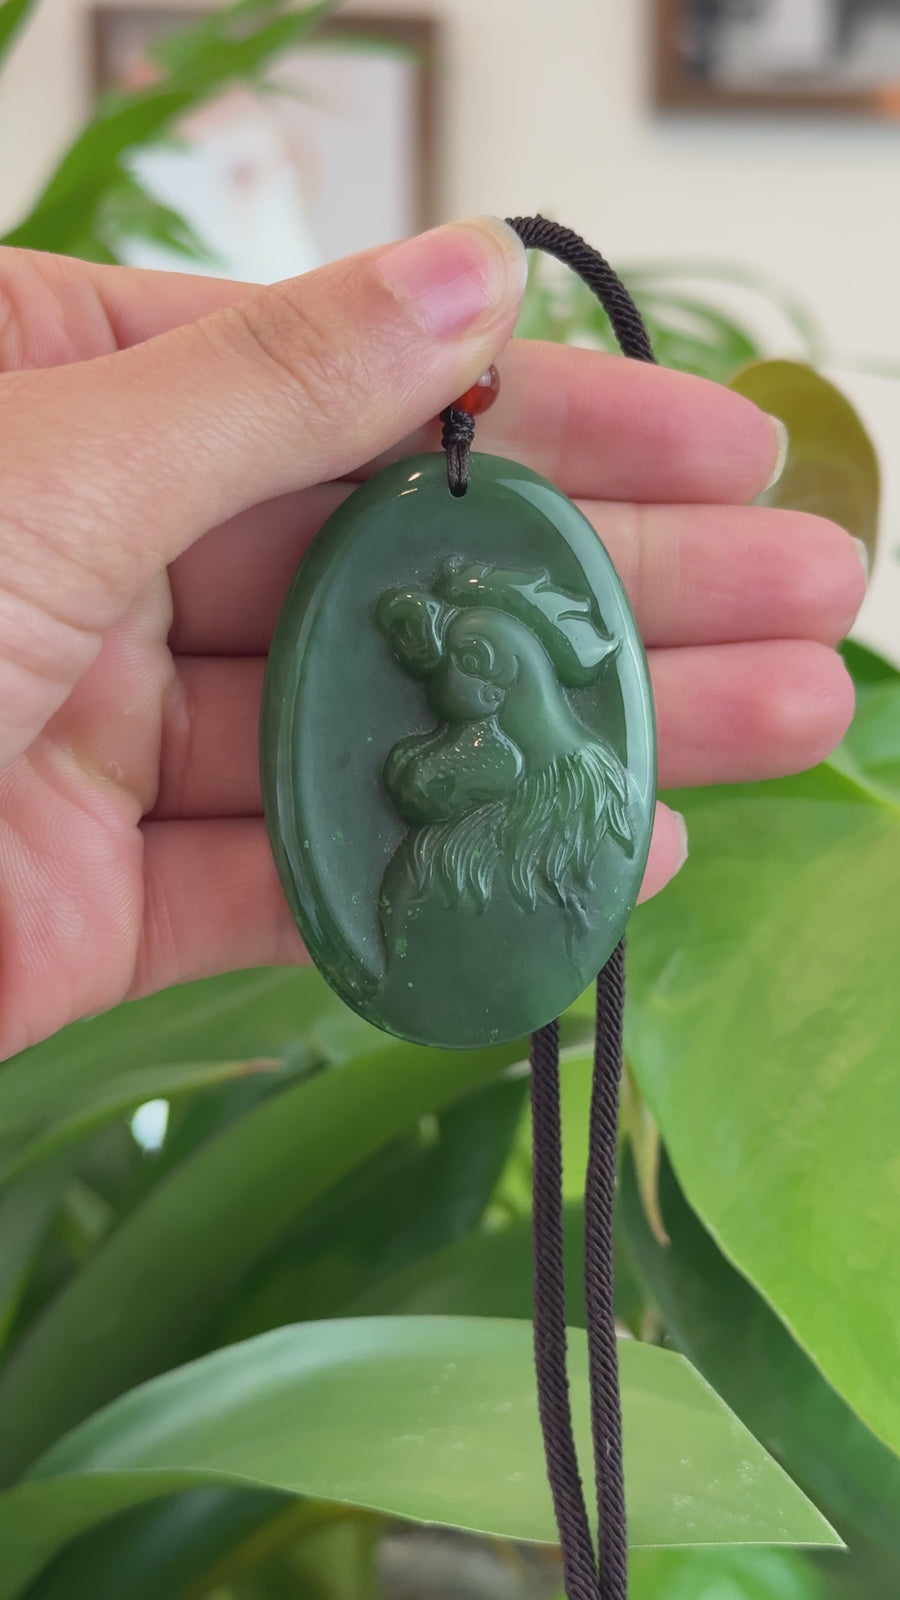 Natural Jade 12 Zodiac: Nephrite Jade Rooster Pendant Necklace in Deep Green